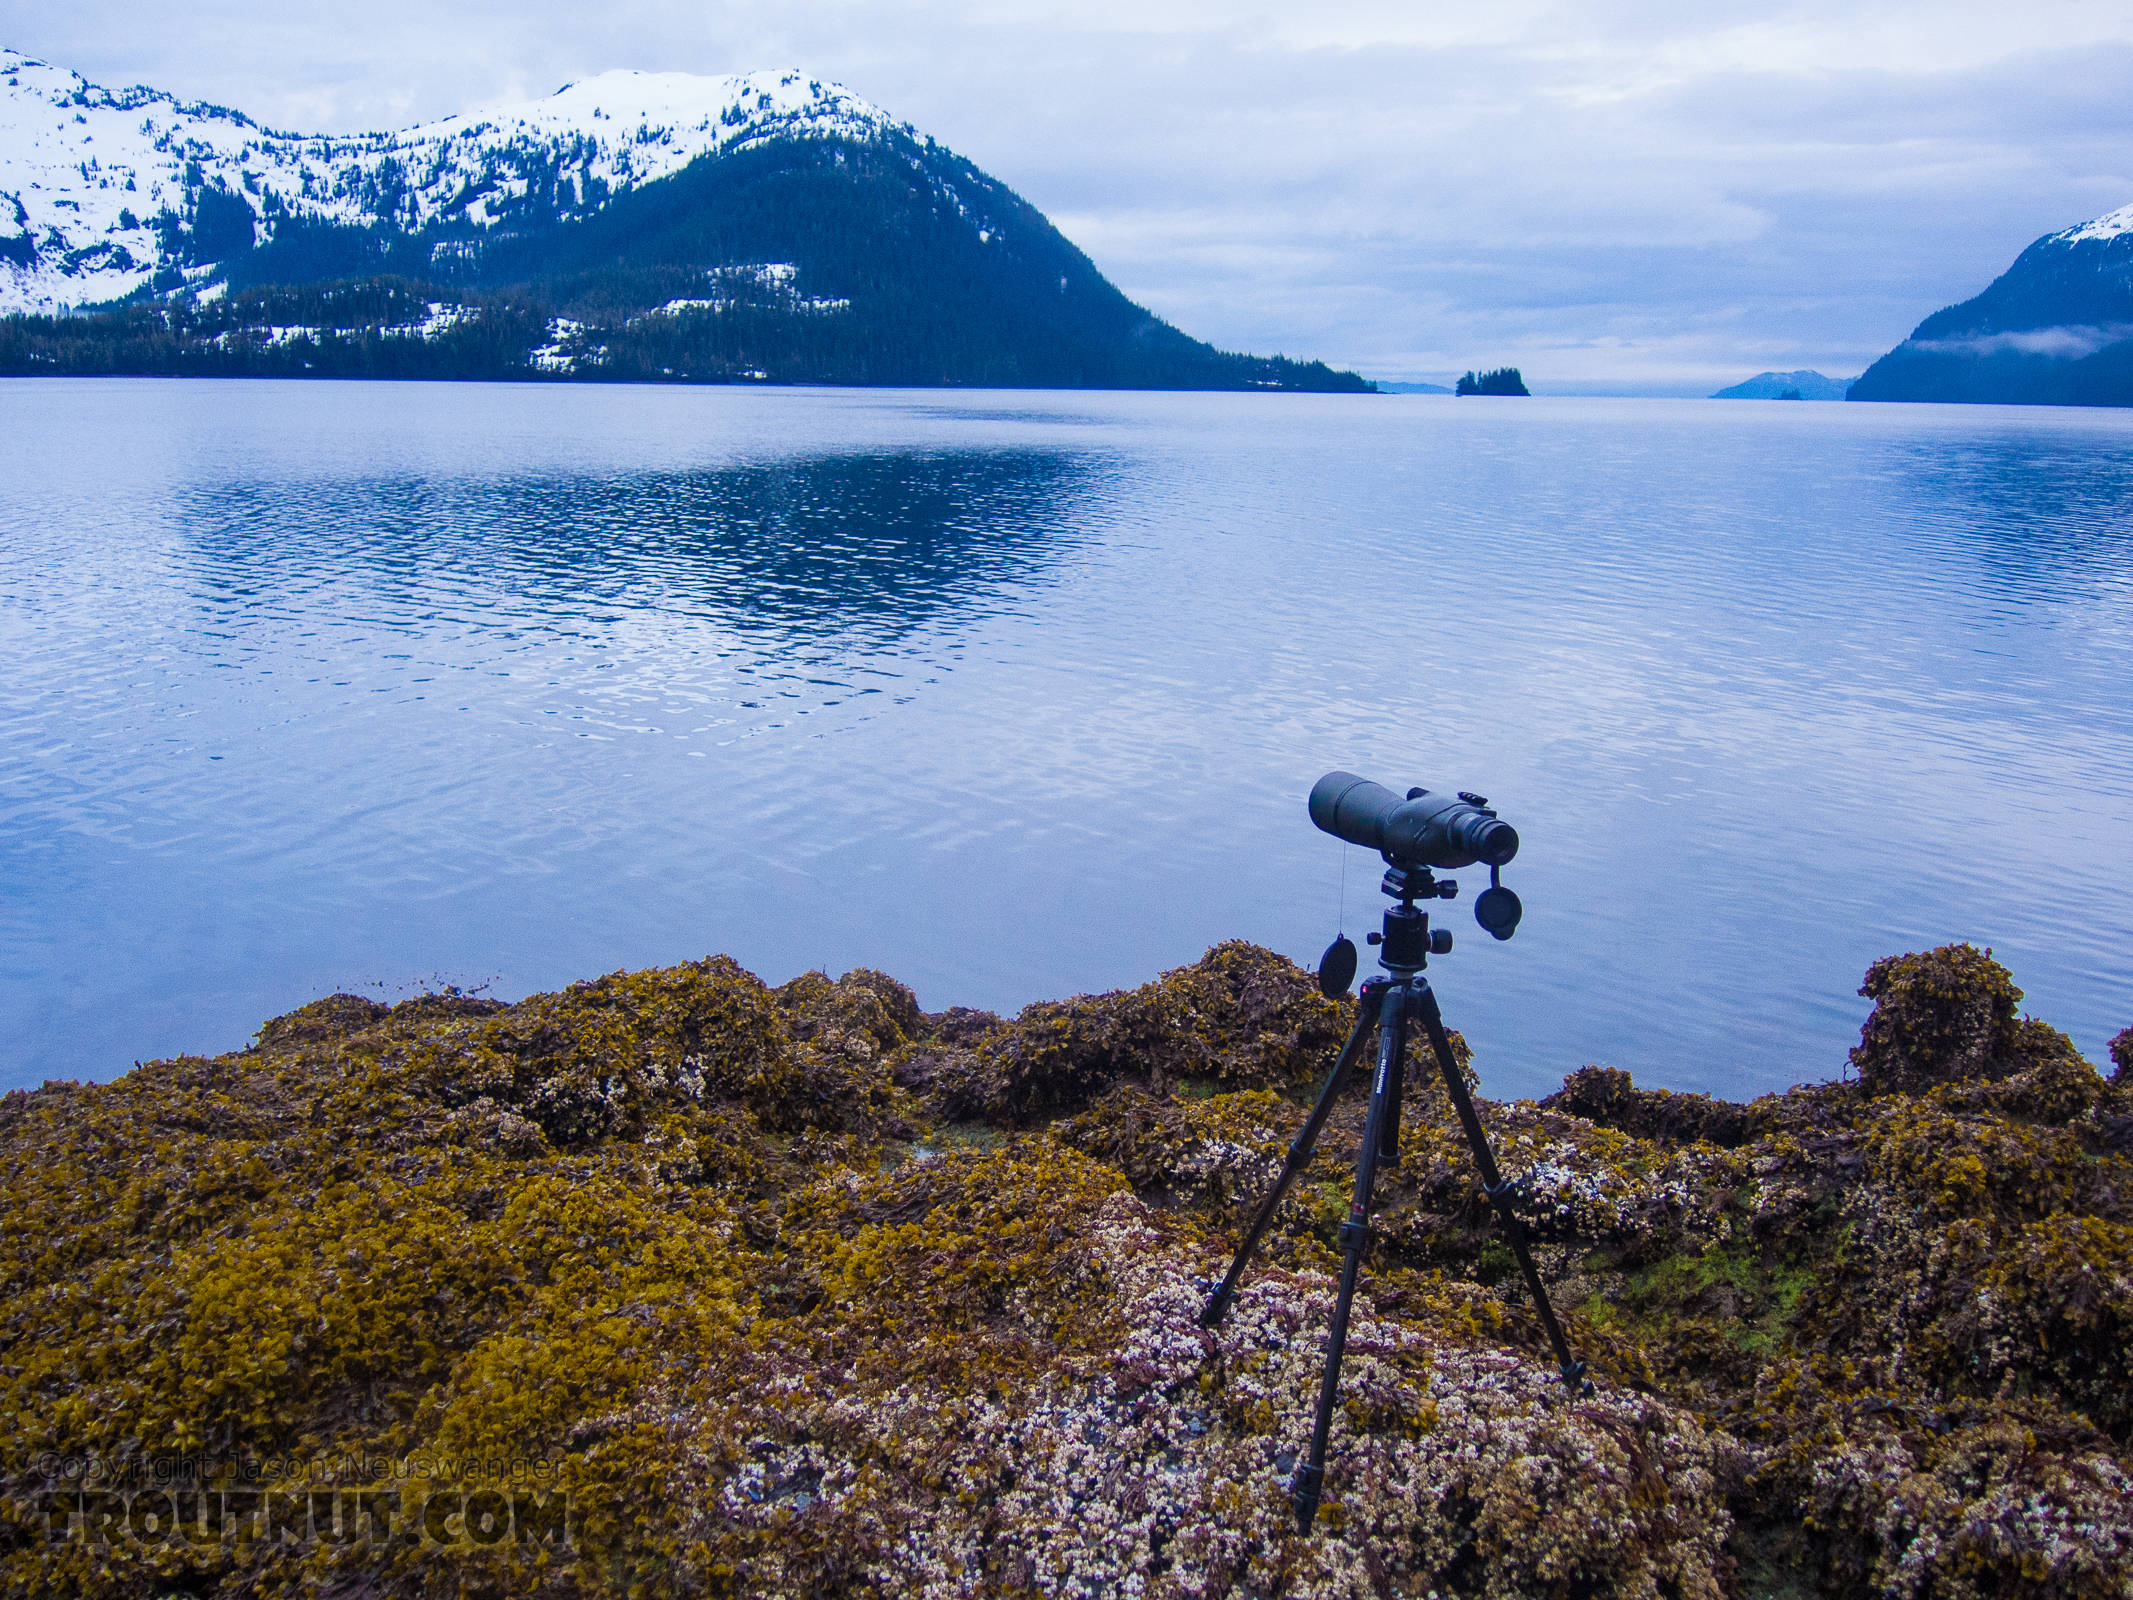 Spotting scope set up on the barnacles at low tide, looking for bears. From Prince William Sound in Alaska.